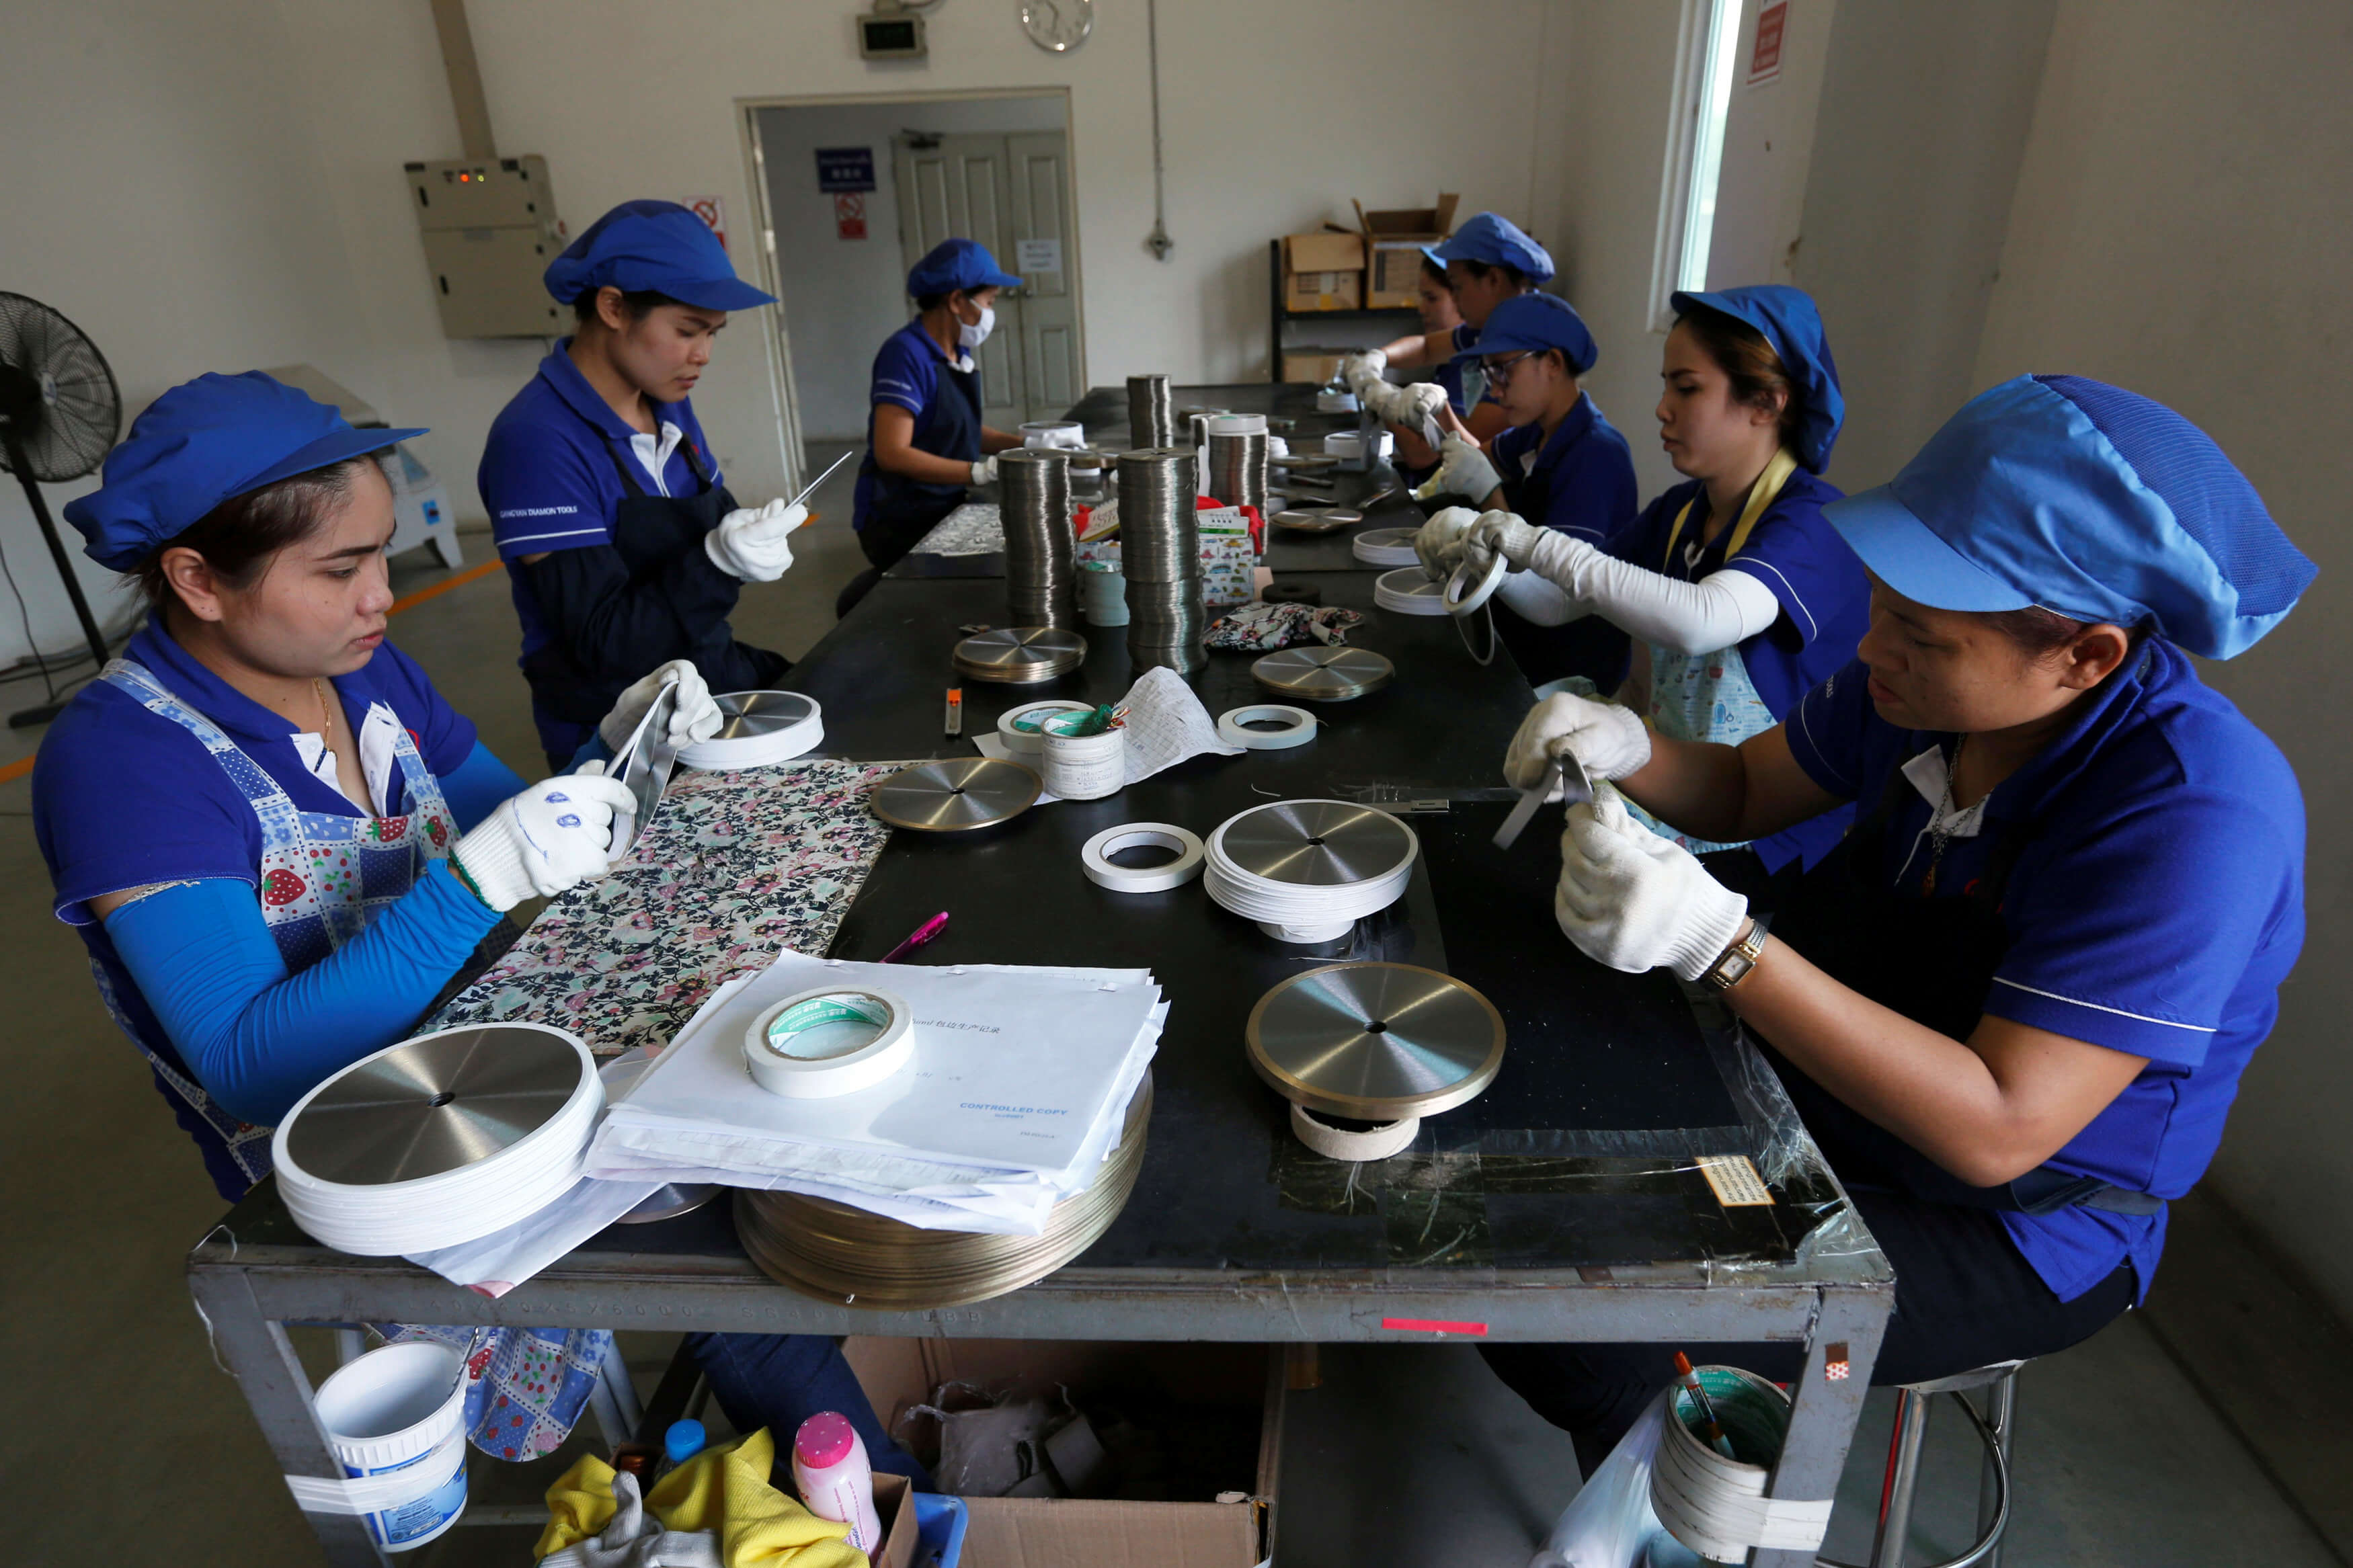 Employees arrange blades for construction at an assembly line at Gang Yan Diamond Tools, a Chinese manufacturing plant, located in the Thai-Chinese Rayong Industrial Zone in Rayong province, east of Bangkok, Thailand, April 7, 2016. REUTERS/Chaiwat Subprasom